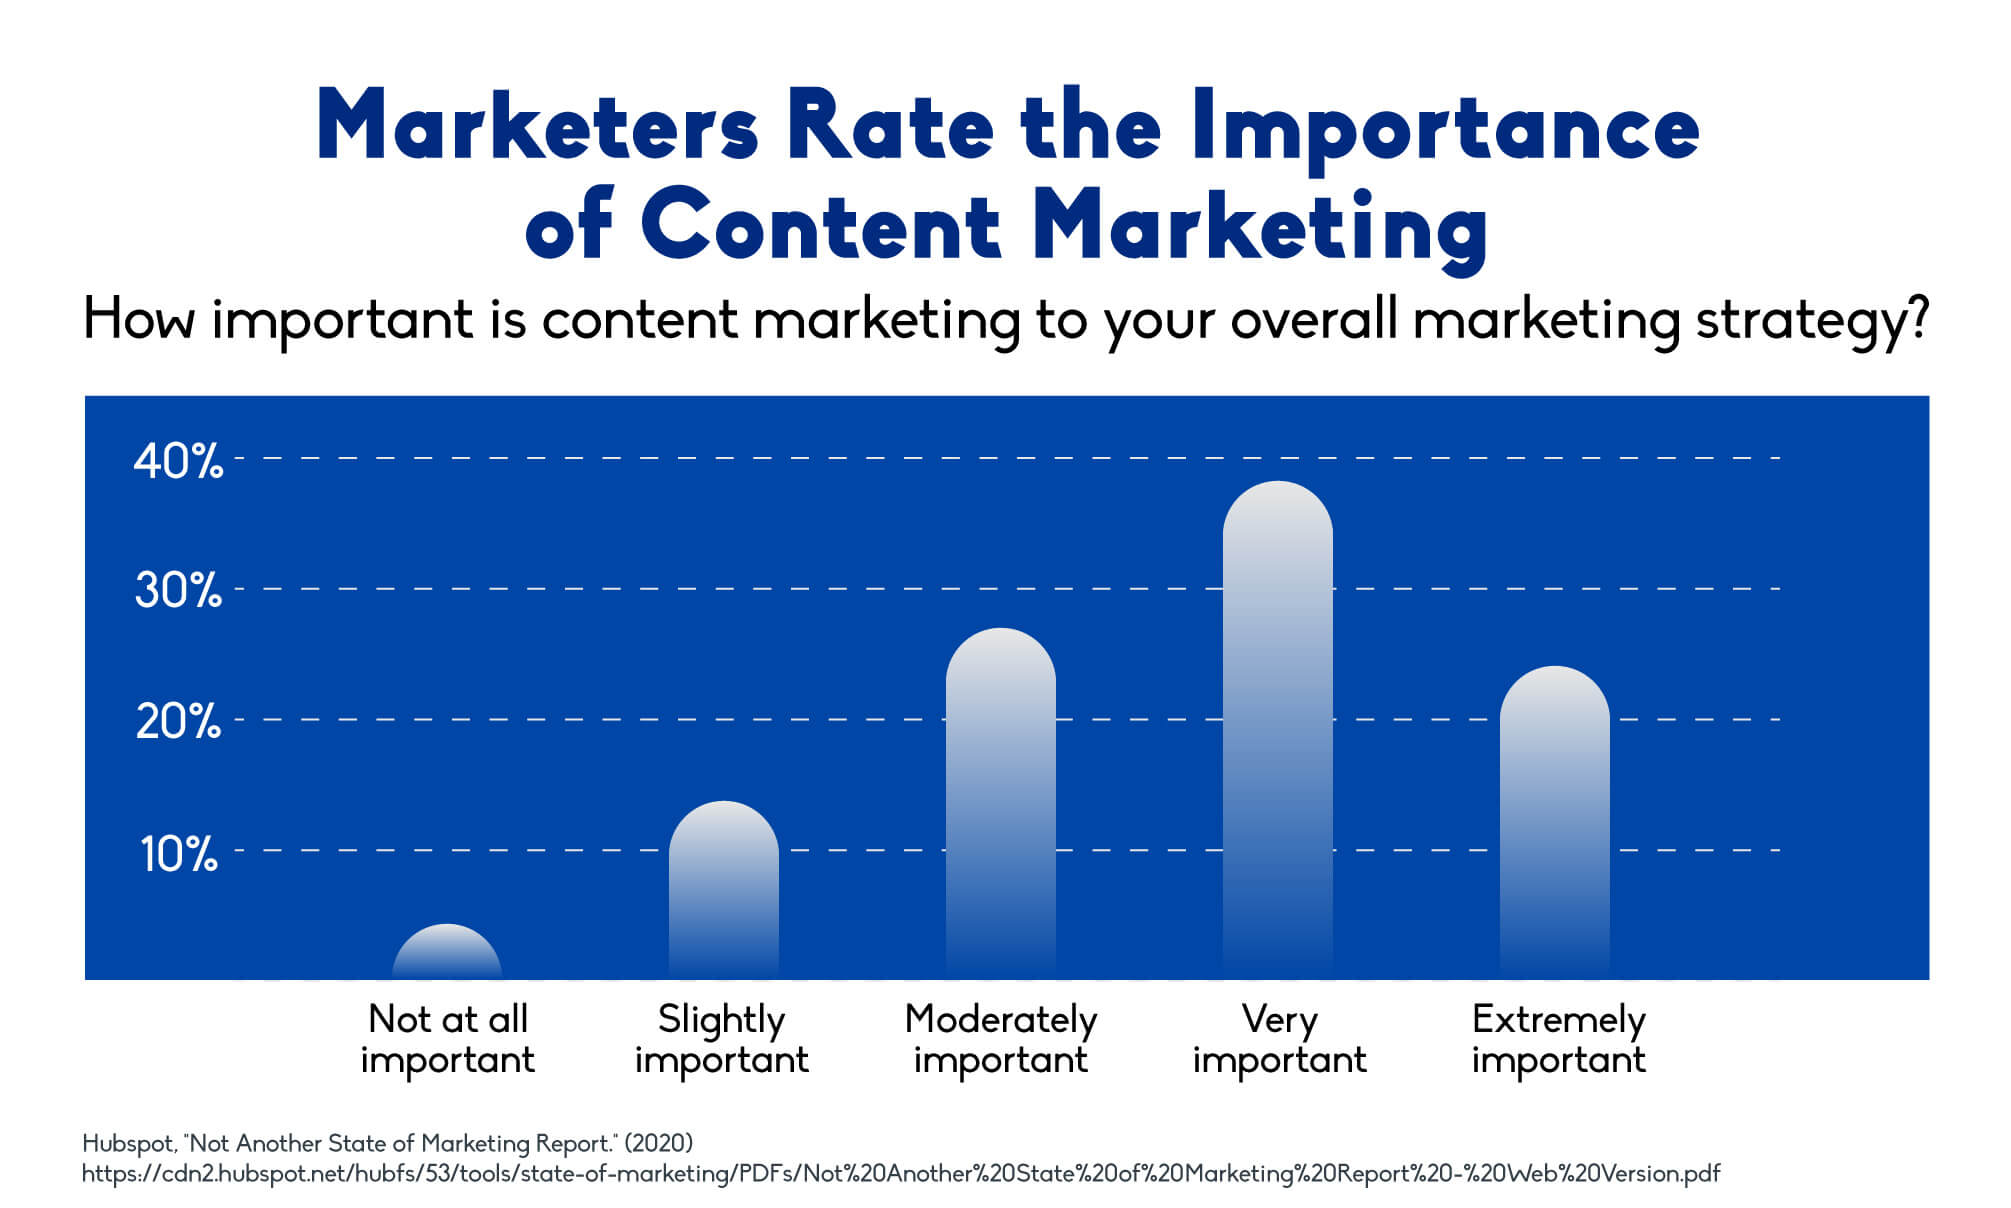 Marketers rate the importance of content marketing